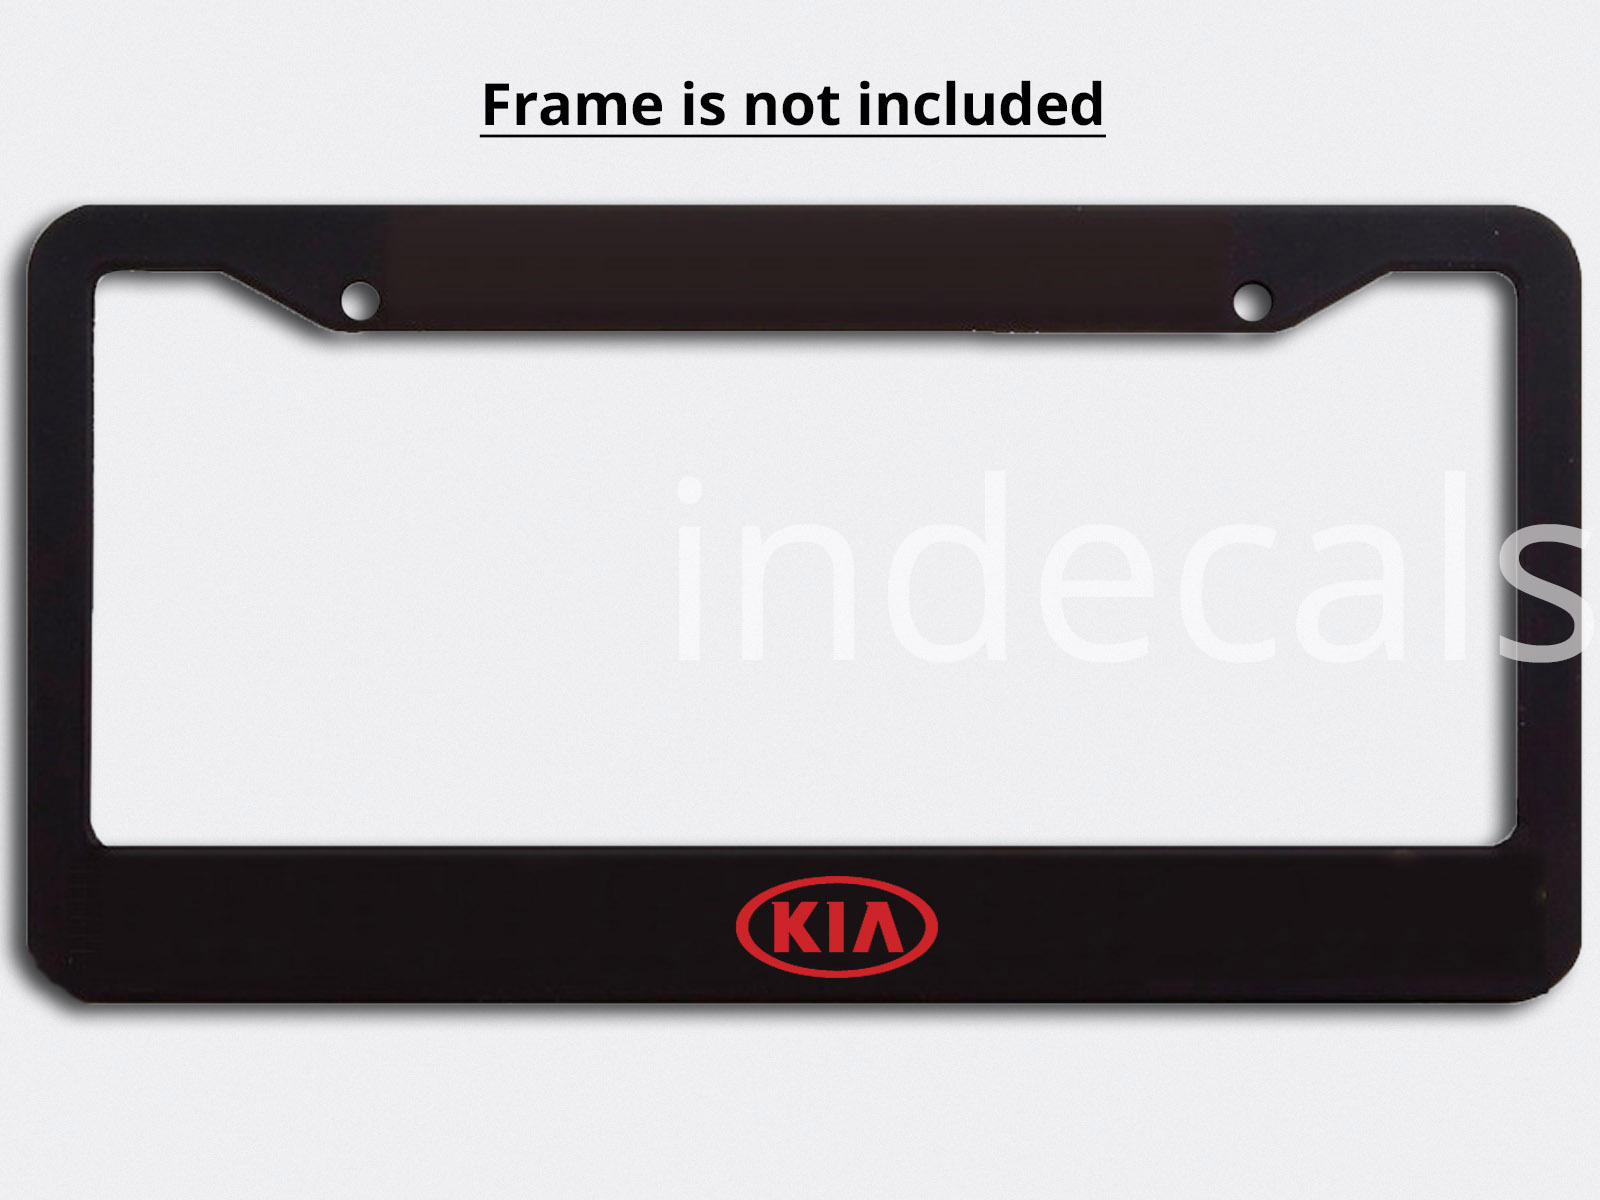 3 x KIA Stickers for License Plate Frame - Red